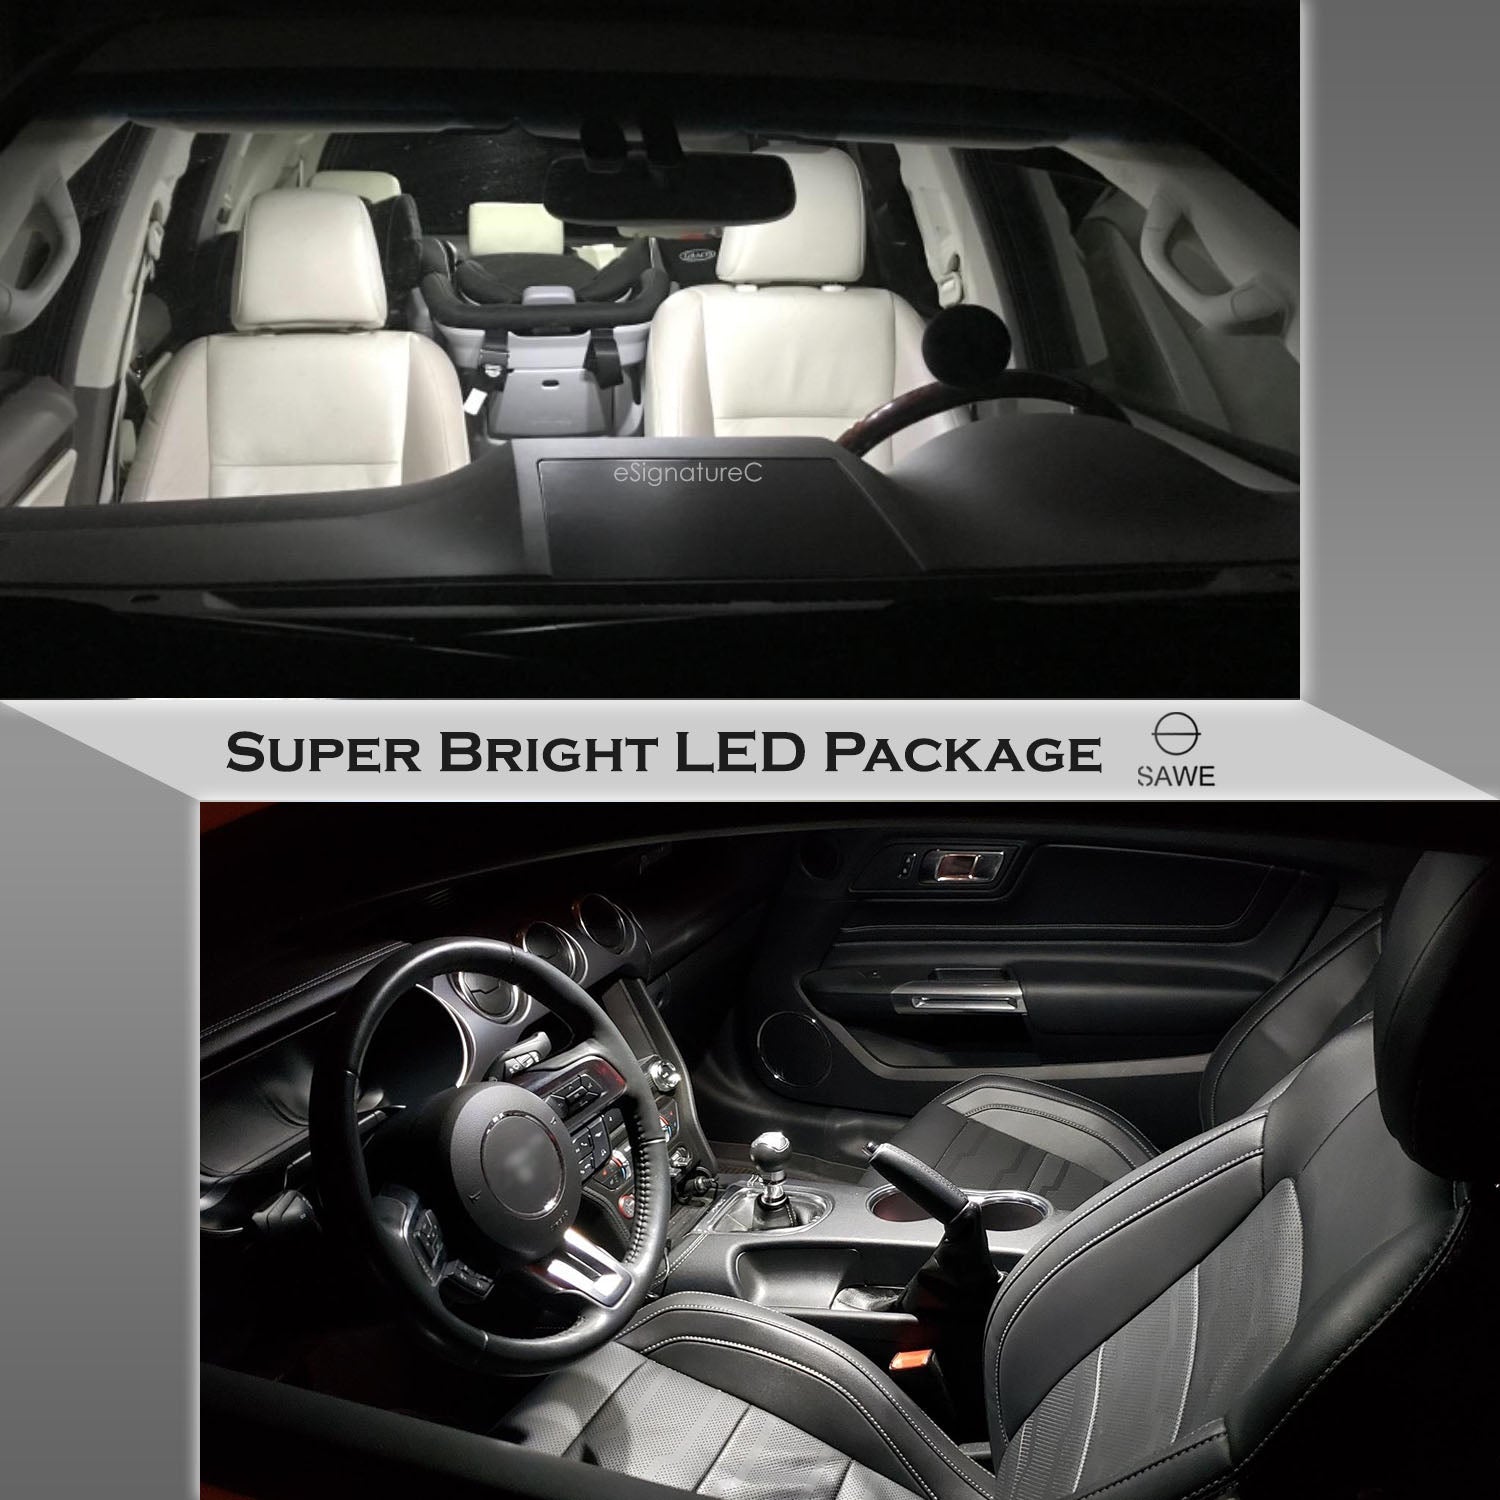 For Acura MDX Interior LED Lights - Dome & Map Light Bulbs Package Kit for 2001 - 2006 - White